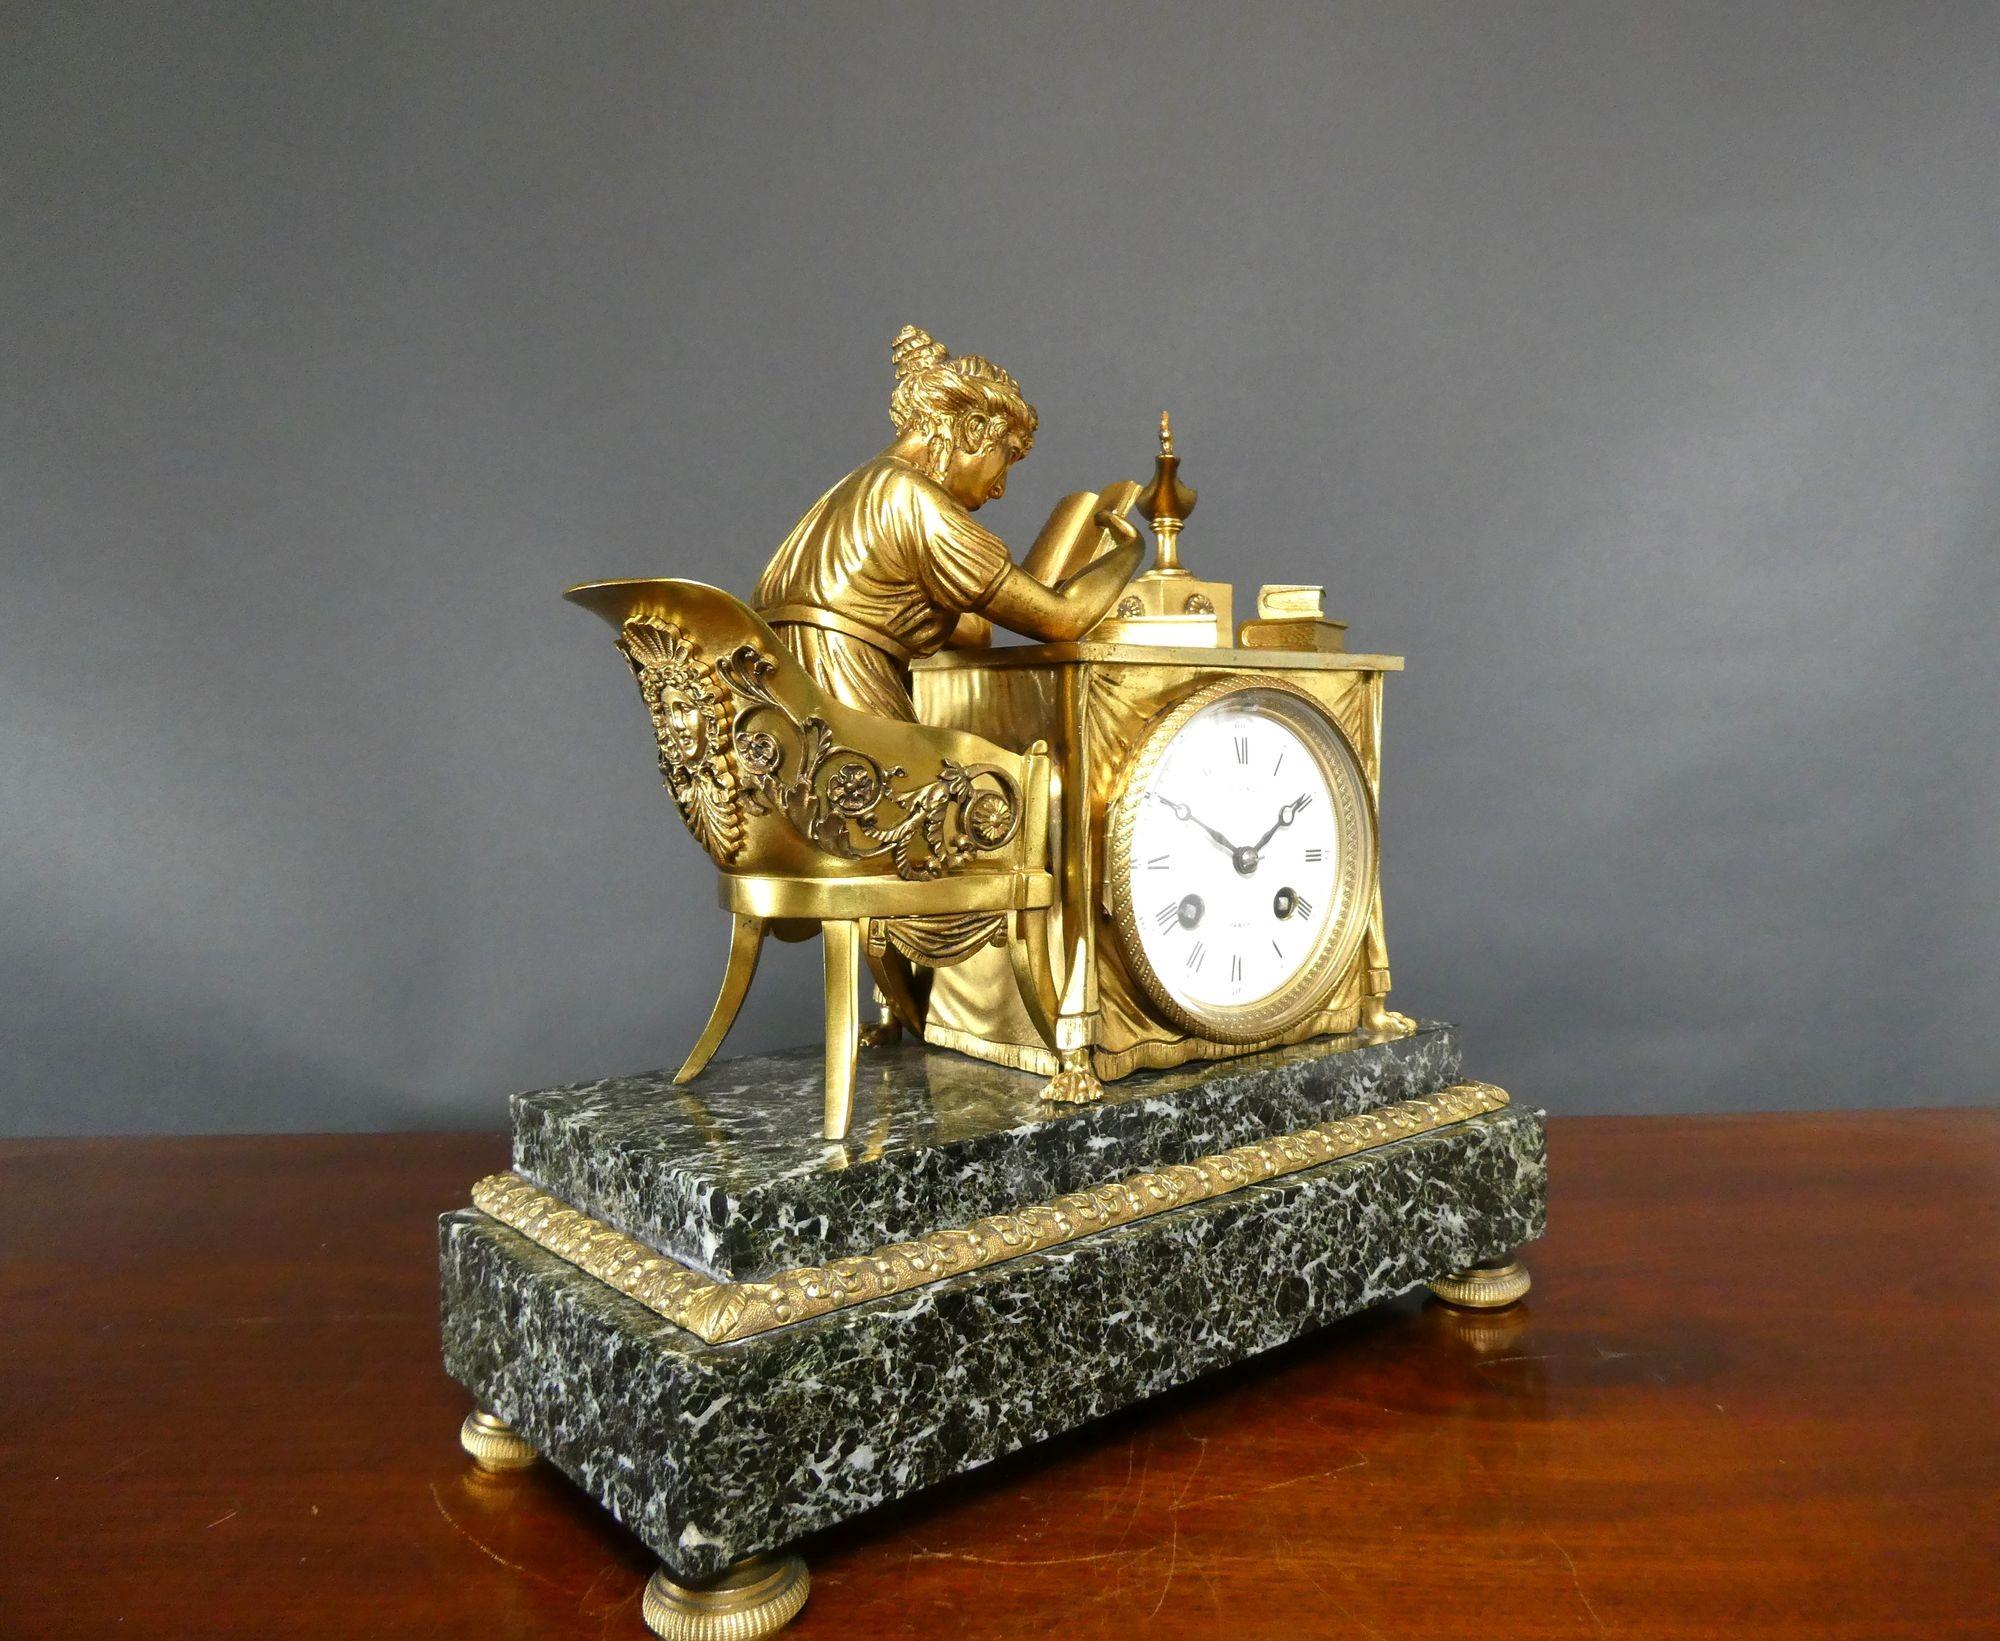 Ormolu And Green Marble Mantel Clock, Maple & Co Ltd, Paris

Ormolu and Verde marble mantel clock depicting a beautifully cast maiden studying her books seated on a decorative chair, resting on a green Verde marble stepped base with applied ormolu